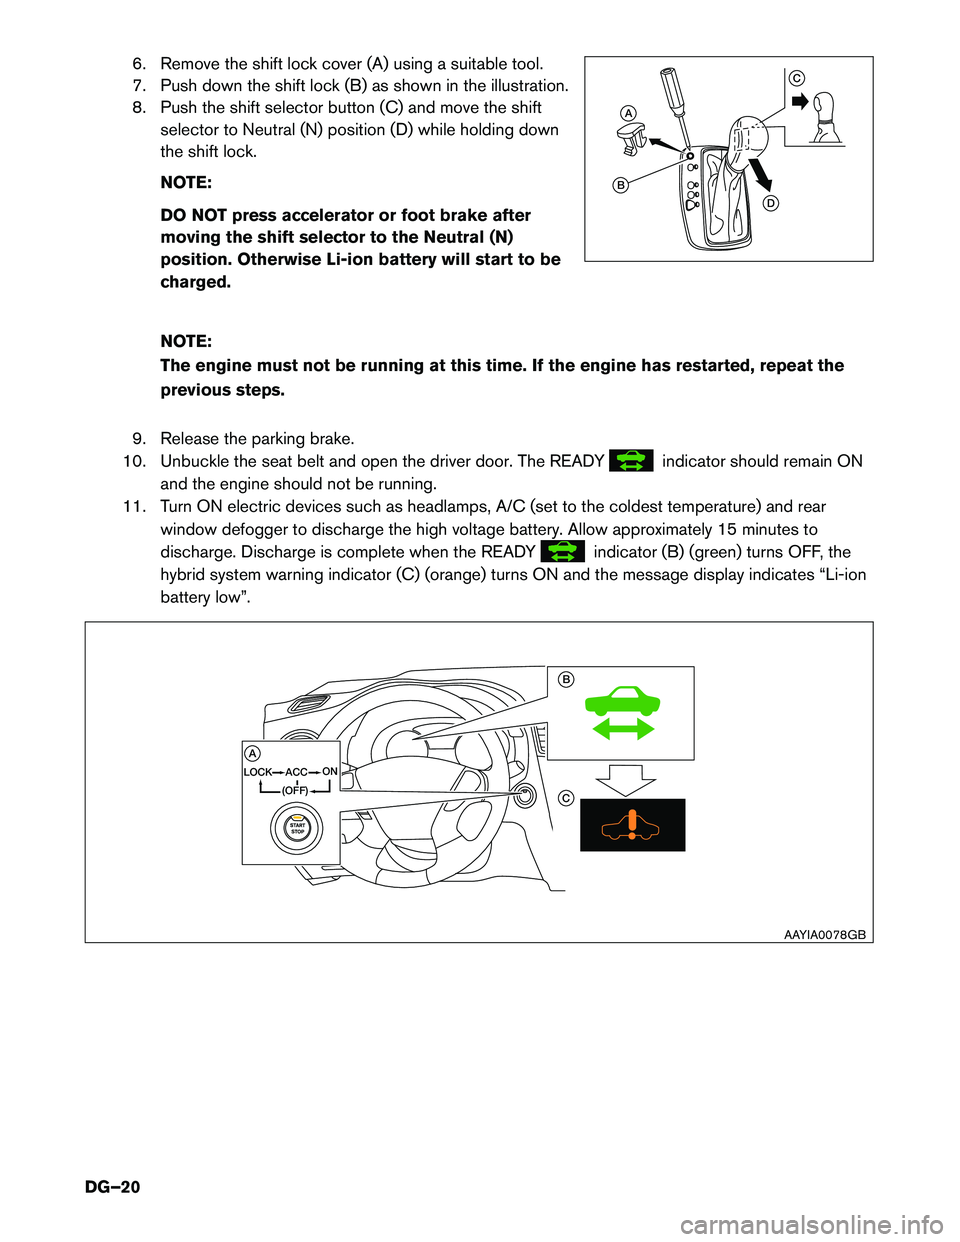 INFINITI QX60 HYBRID 2014  Dismantling Guide 6. Remove the shift lock cover (A) using a suitable tool. 
7. Push down the shift lock (B) as shown in the illustration.
8. Push the shift selector button (C) and move the shiftselector to Neutral (N)